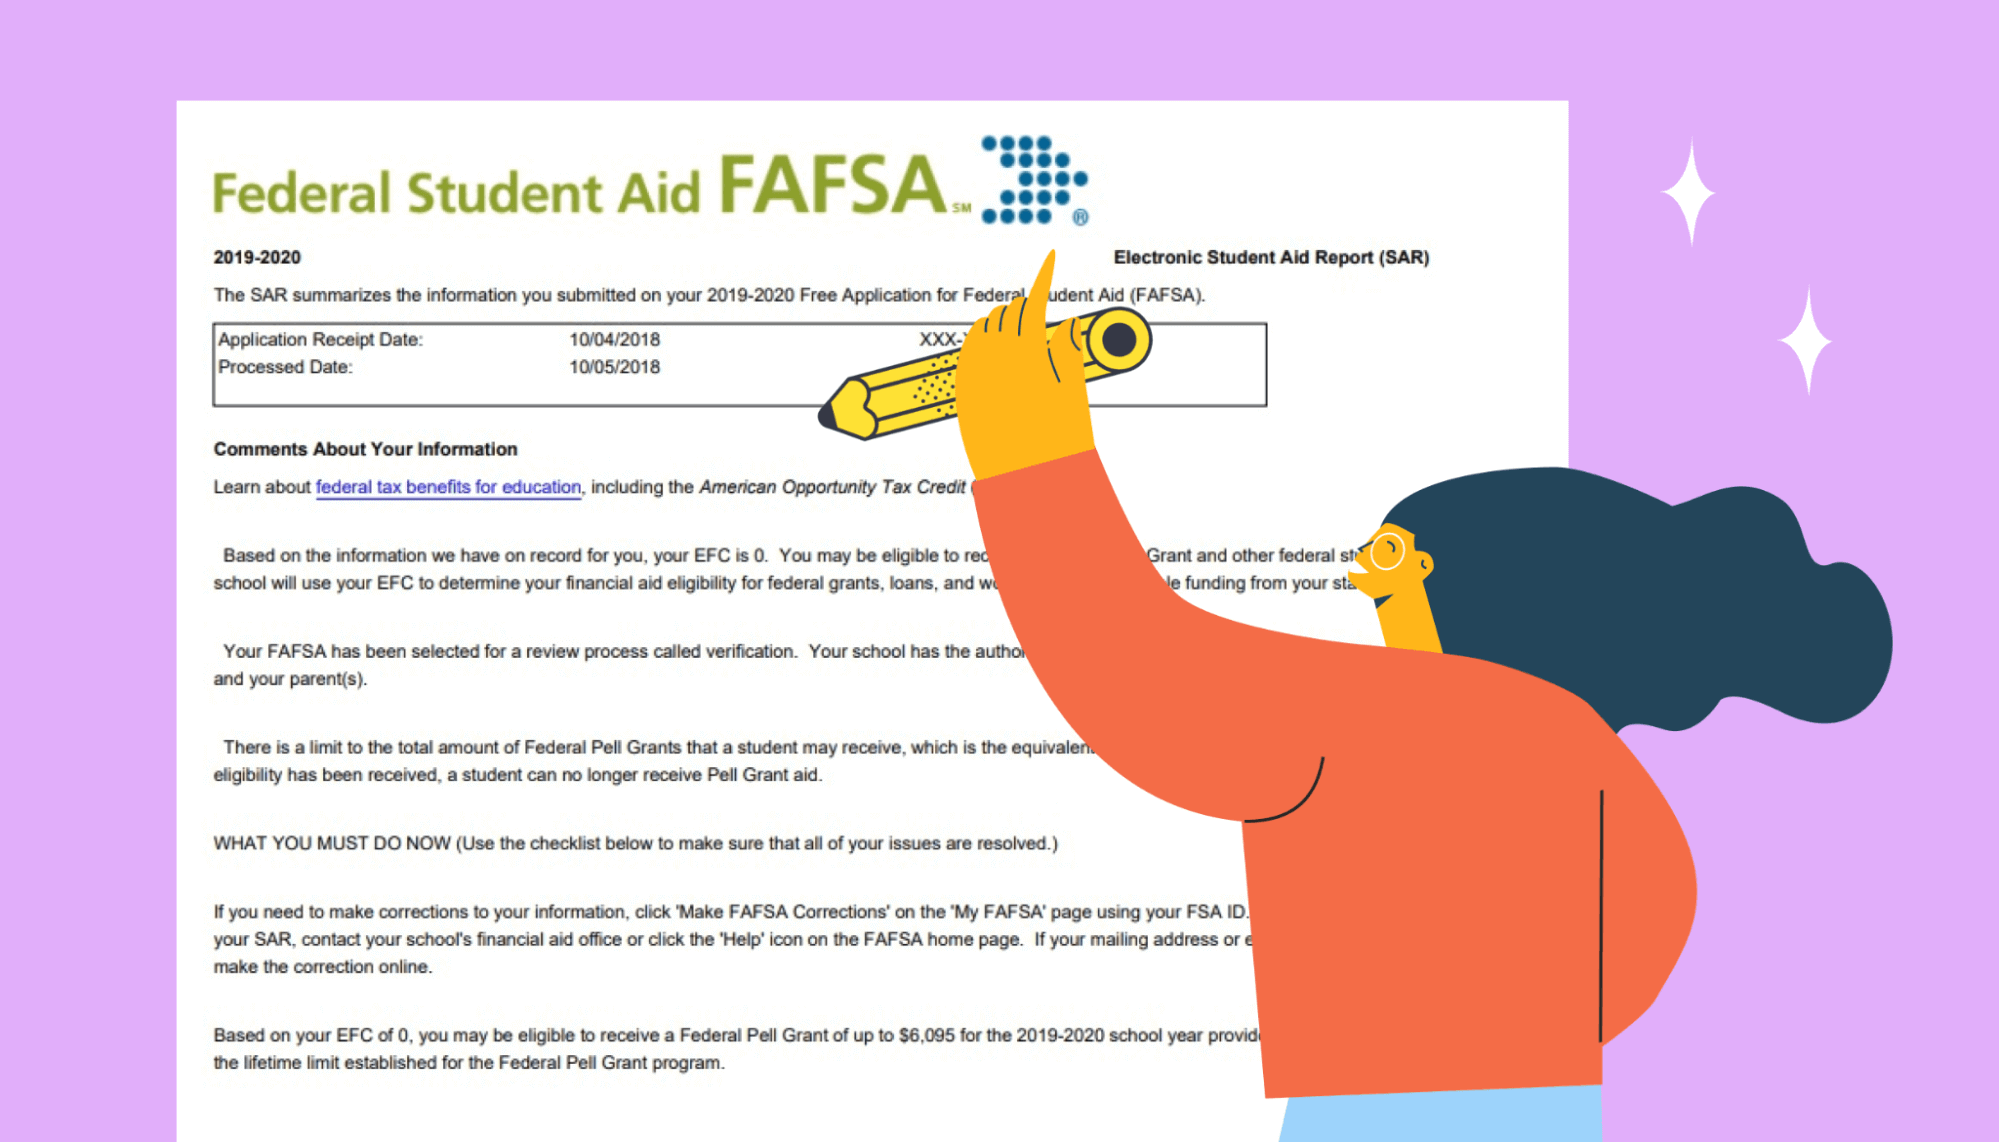 Student Aid Report